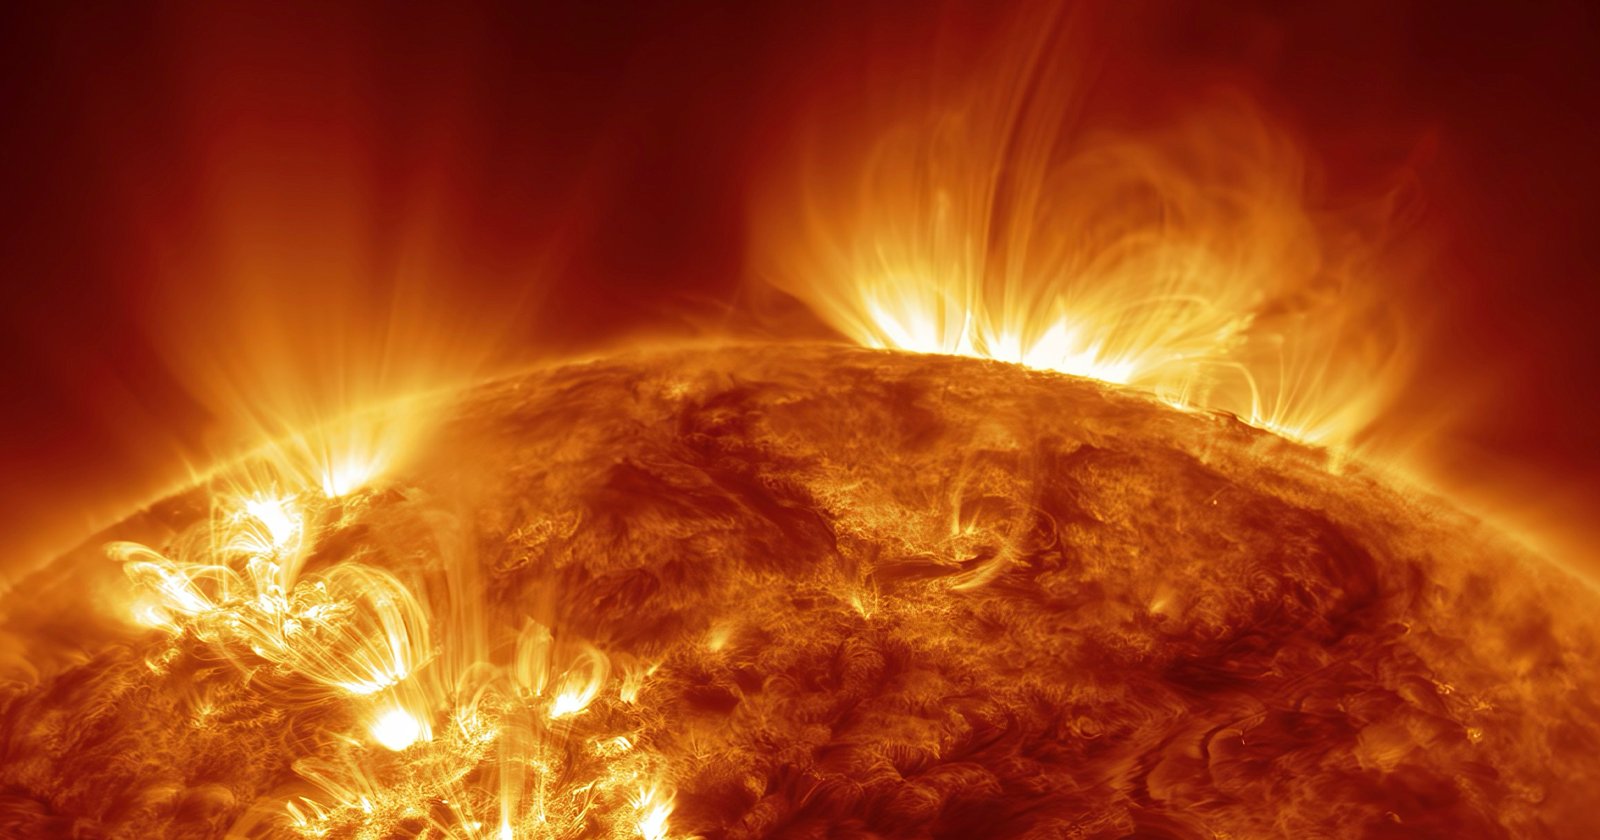 Close-up, remastered view of a photo of the sun